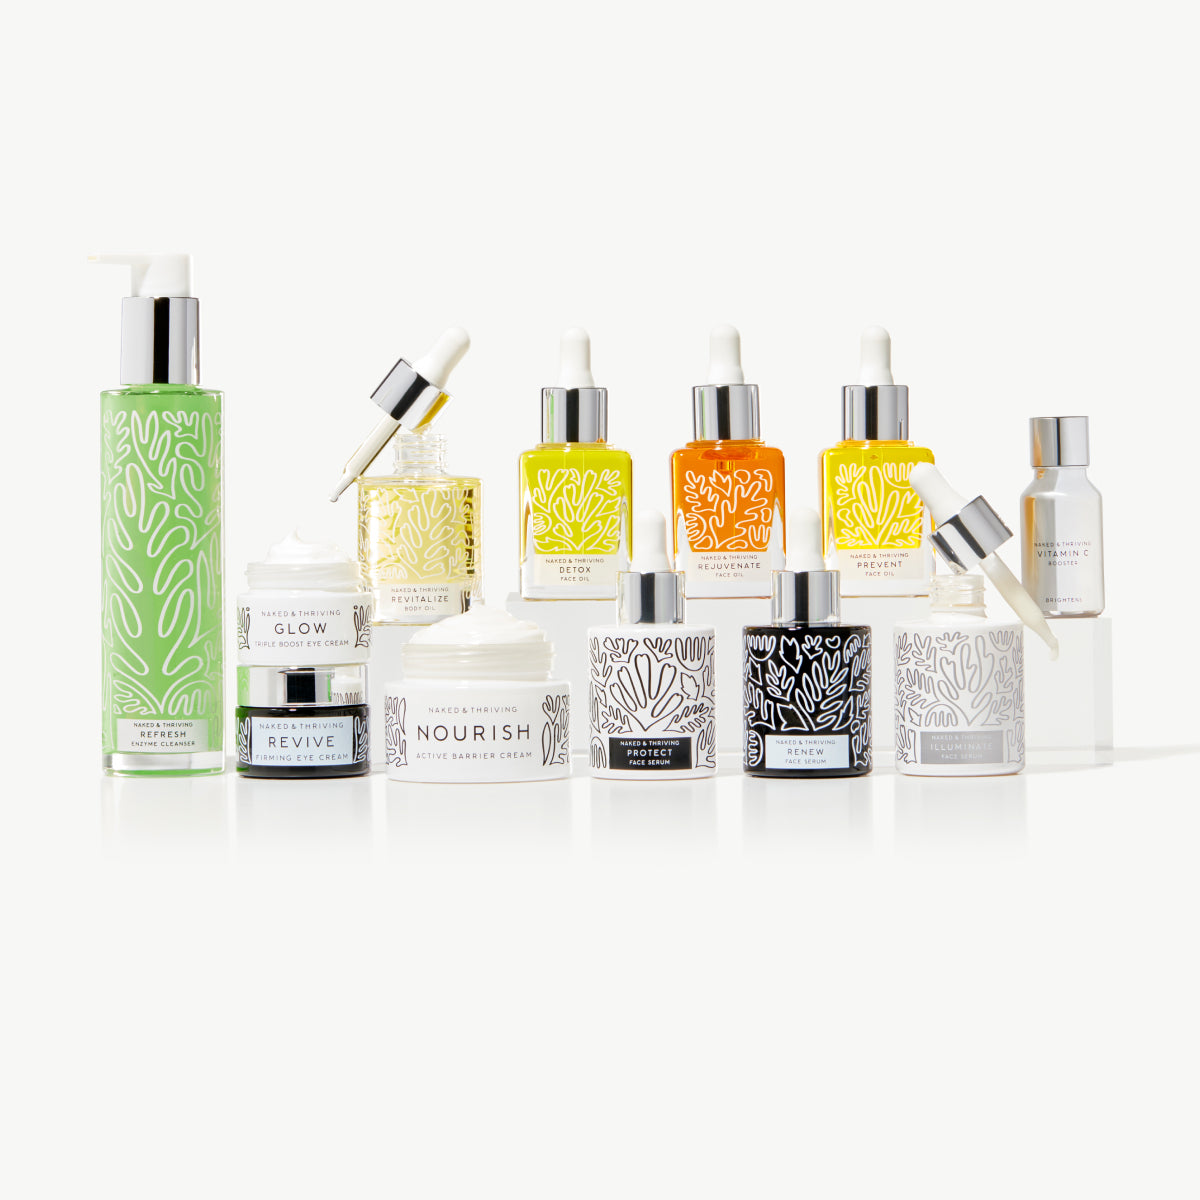 Bestsellers Discovery Set | Cleanser, Moisturizer, Serum + Oil